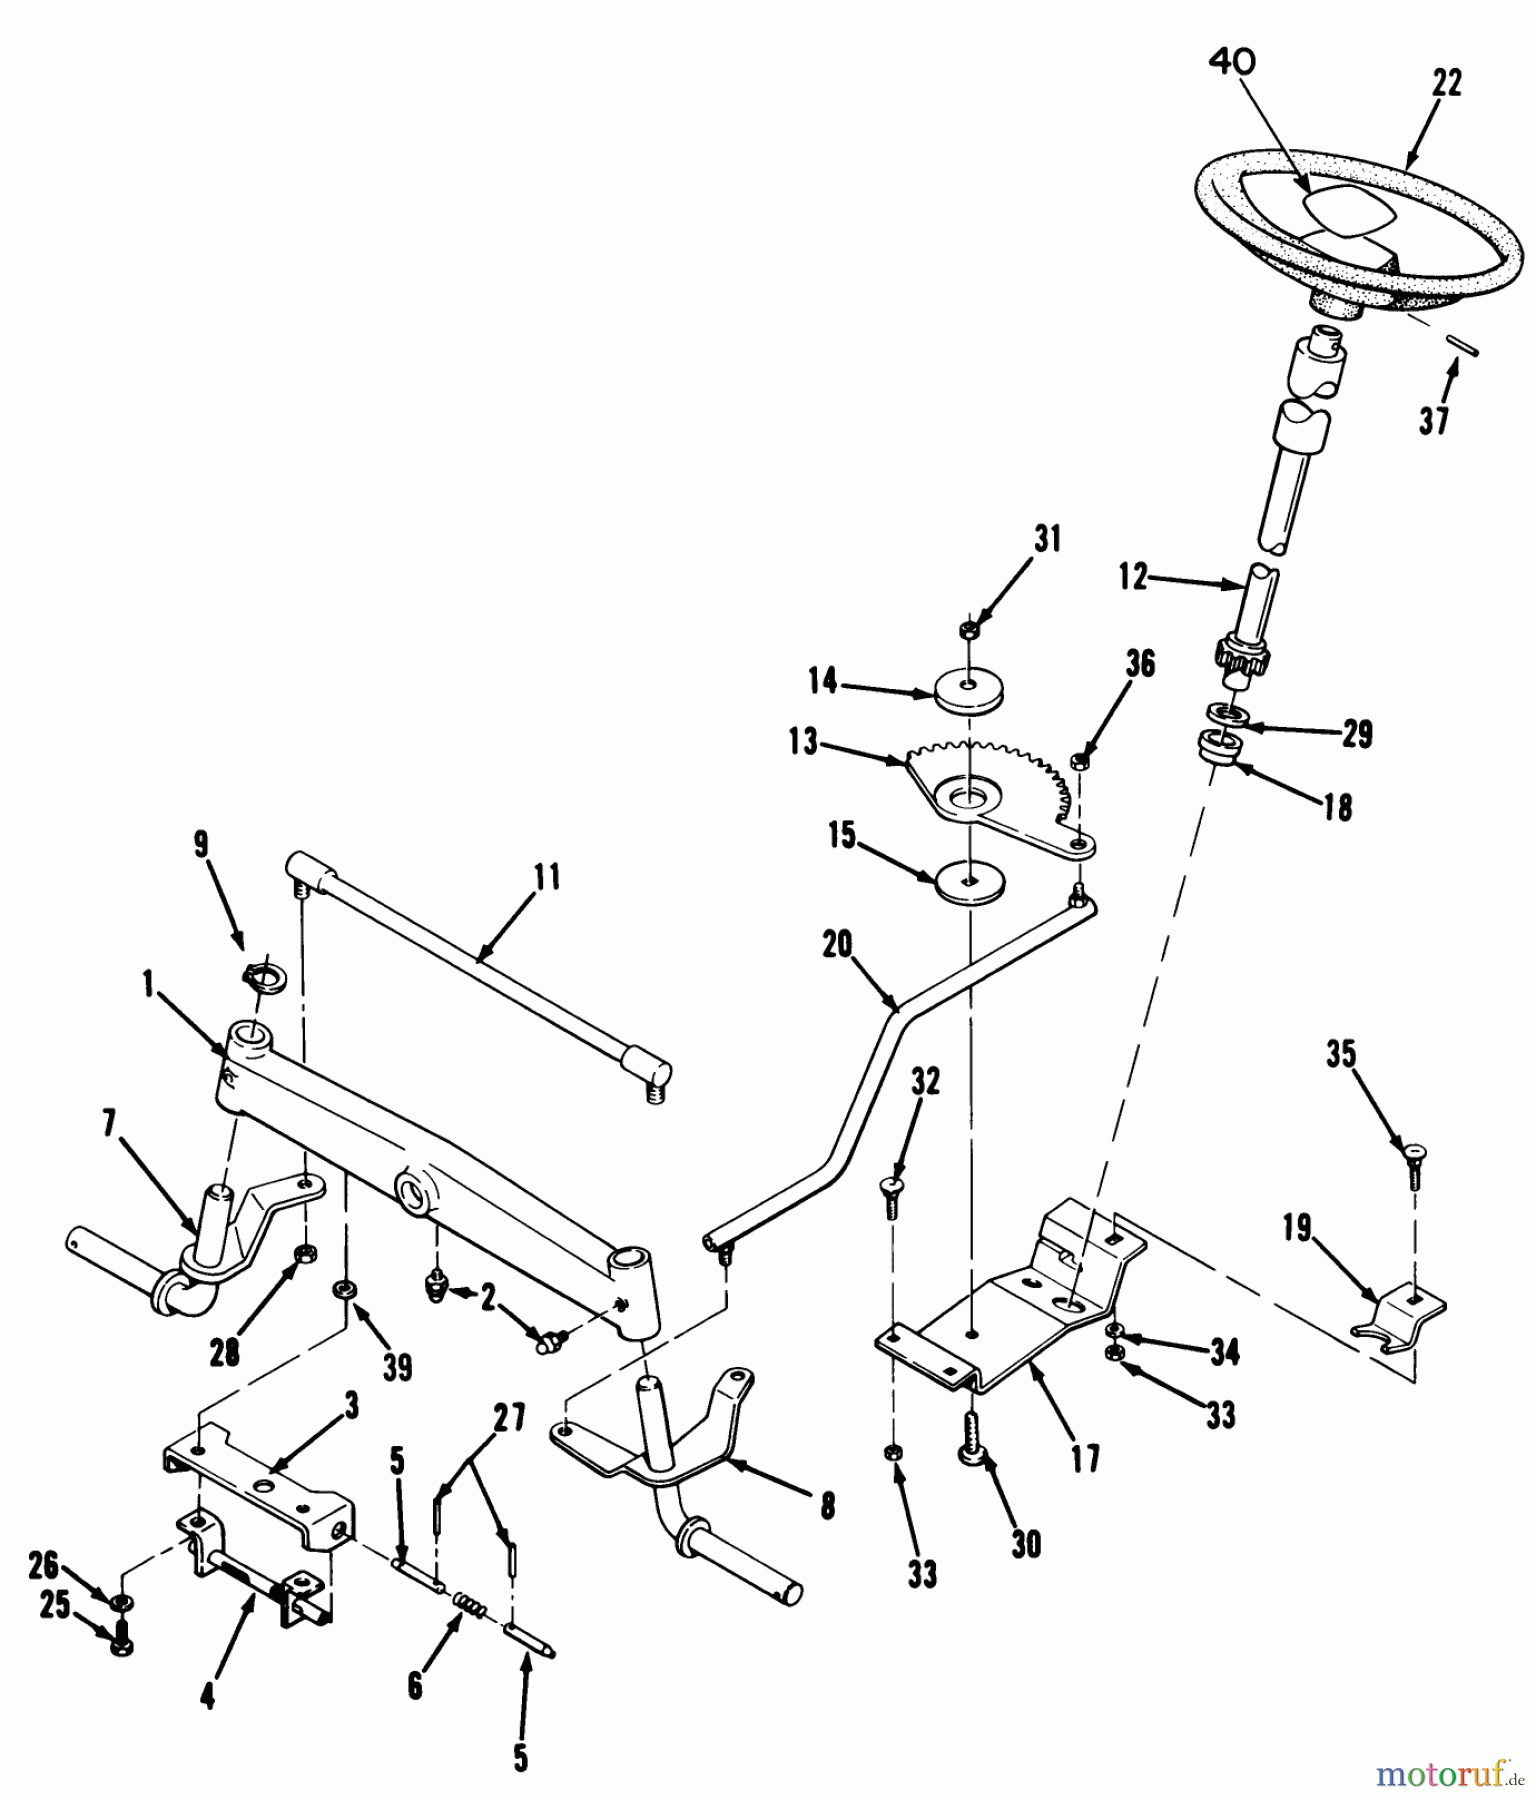  Toro Neu Mowers, Lawn & Garden Tractor Seite 2 R2-12OE02 (212-H) - Toro 212-H Tractor, 1992 (2000001-2999999) FRONT AXLE & STEERING ASSEMBLY